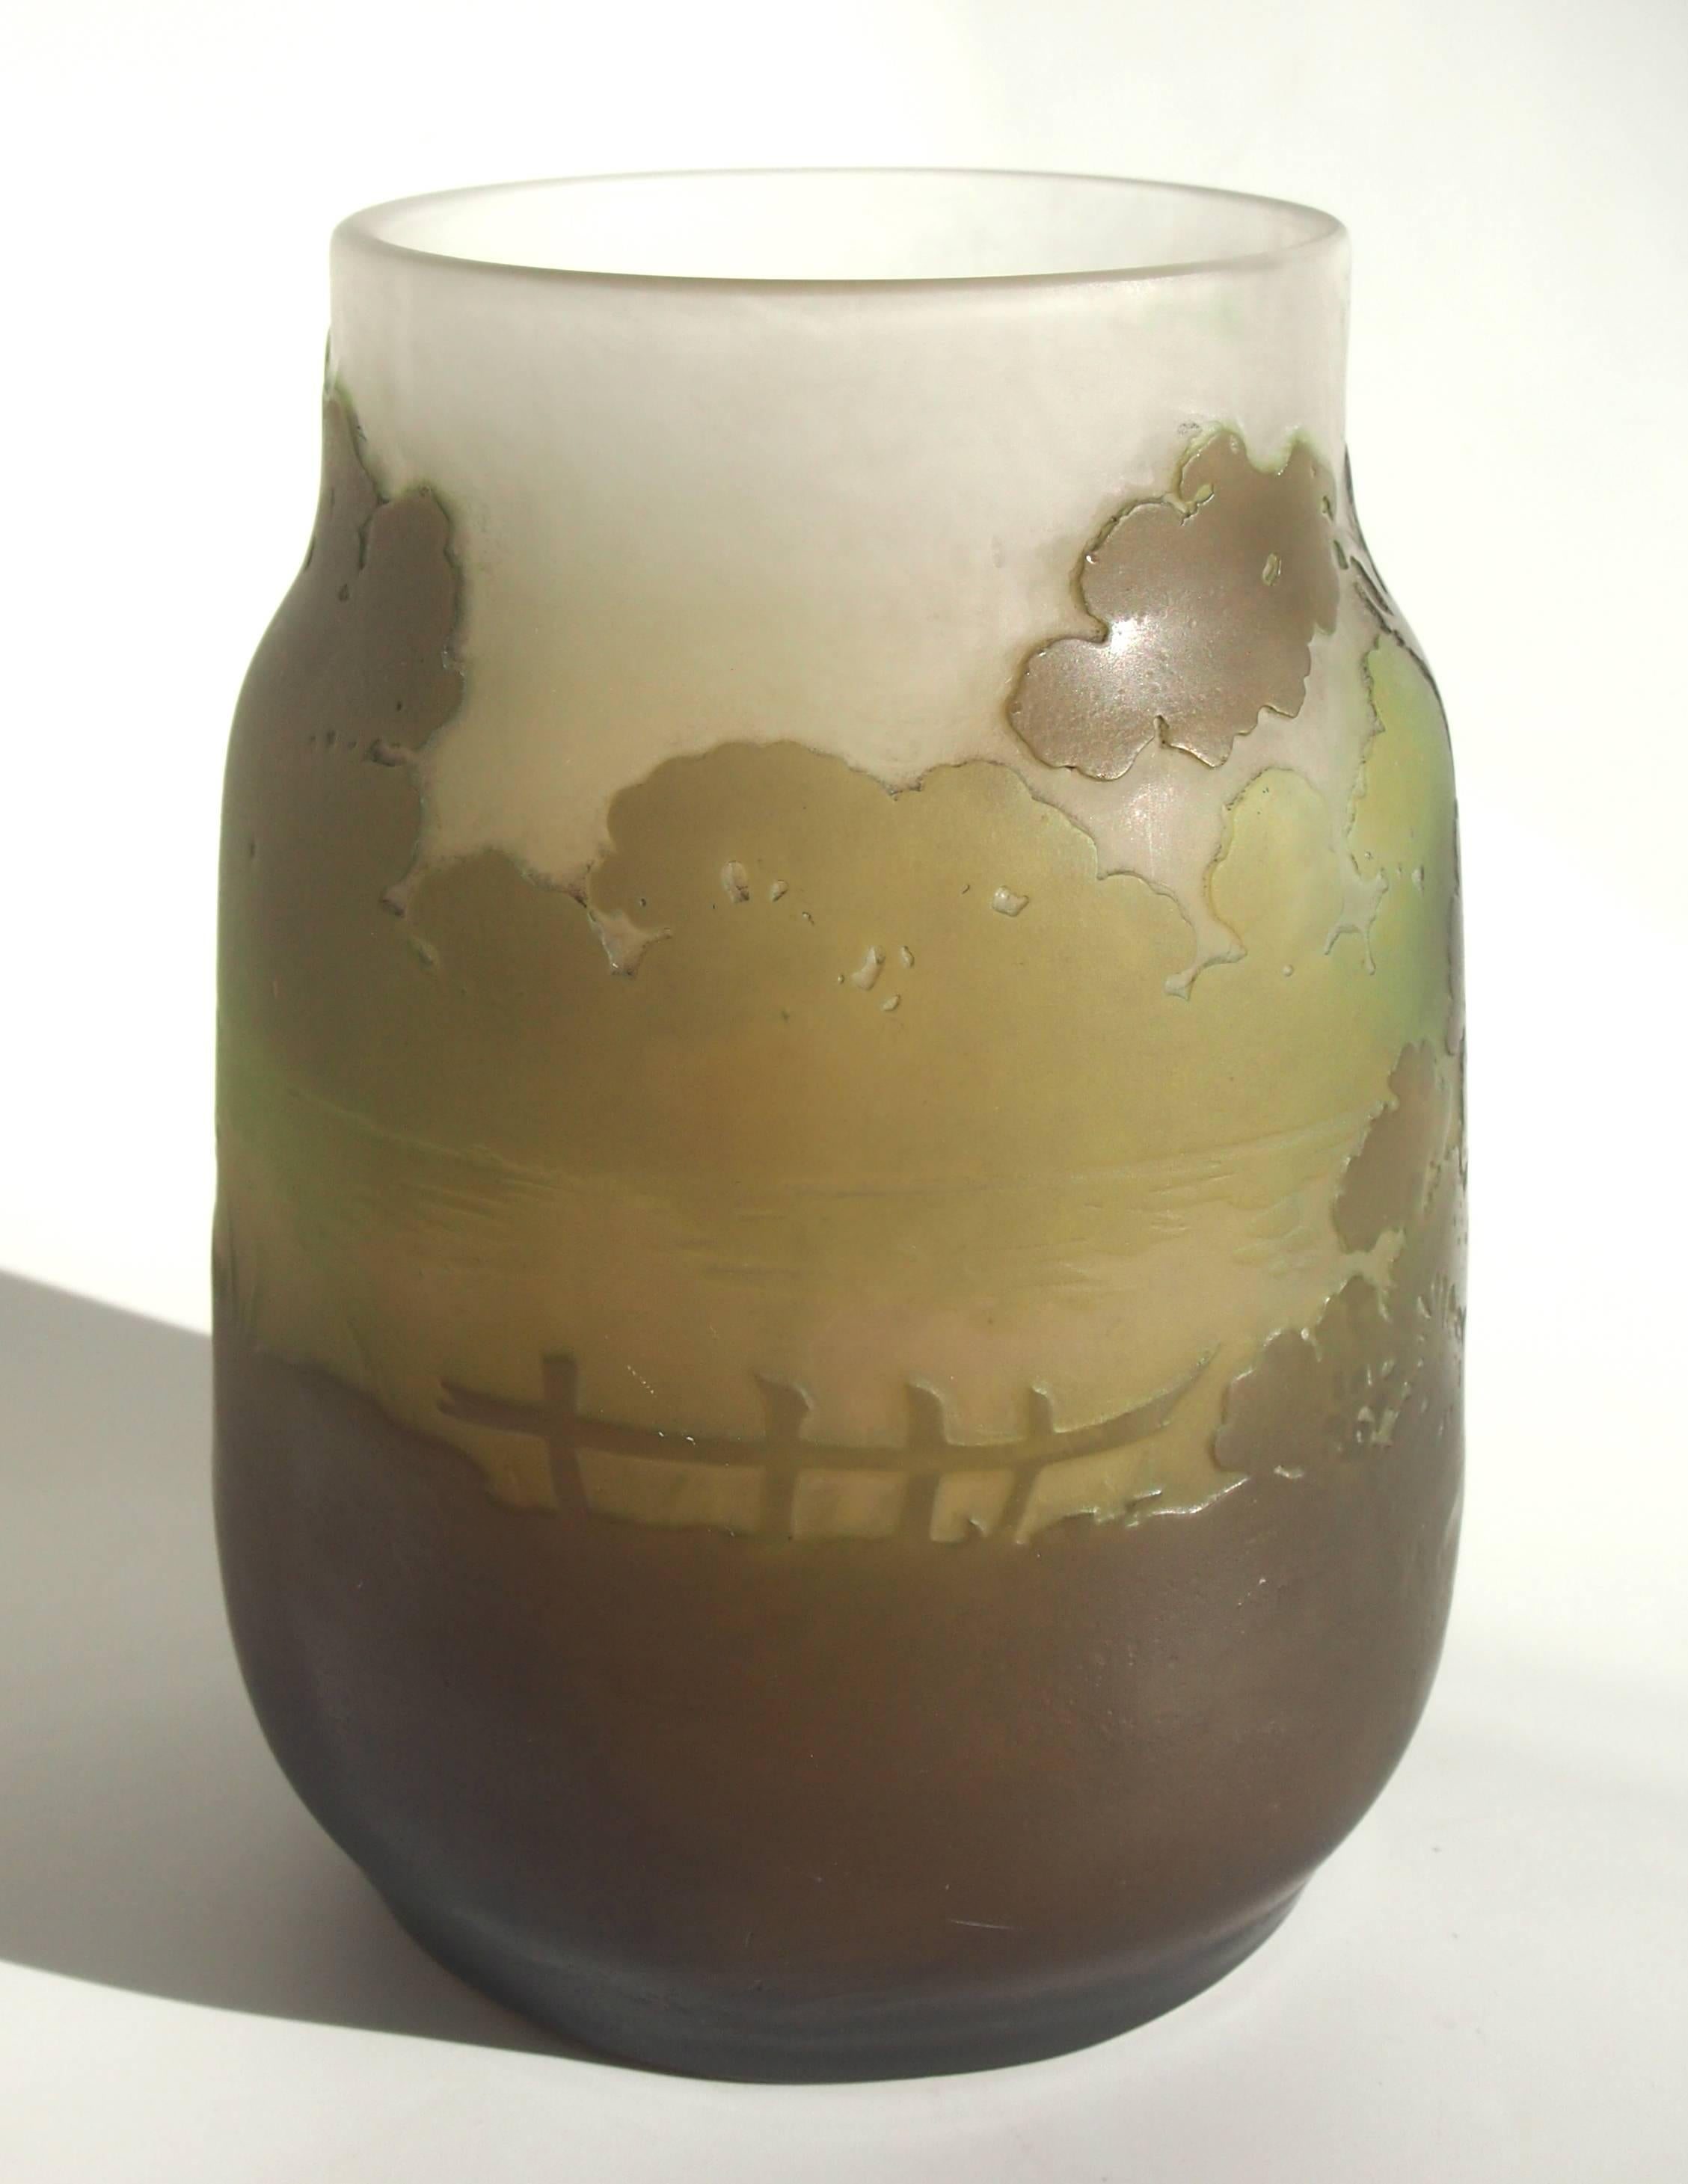 French Art Nouveau Emile Galle Cameo Glass 'Morning Mist' Landscape Vase c1900 In Good Condition For Sale In London, GB